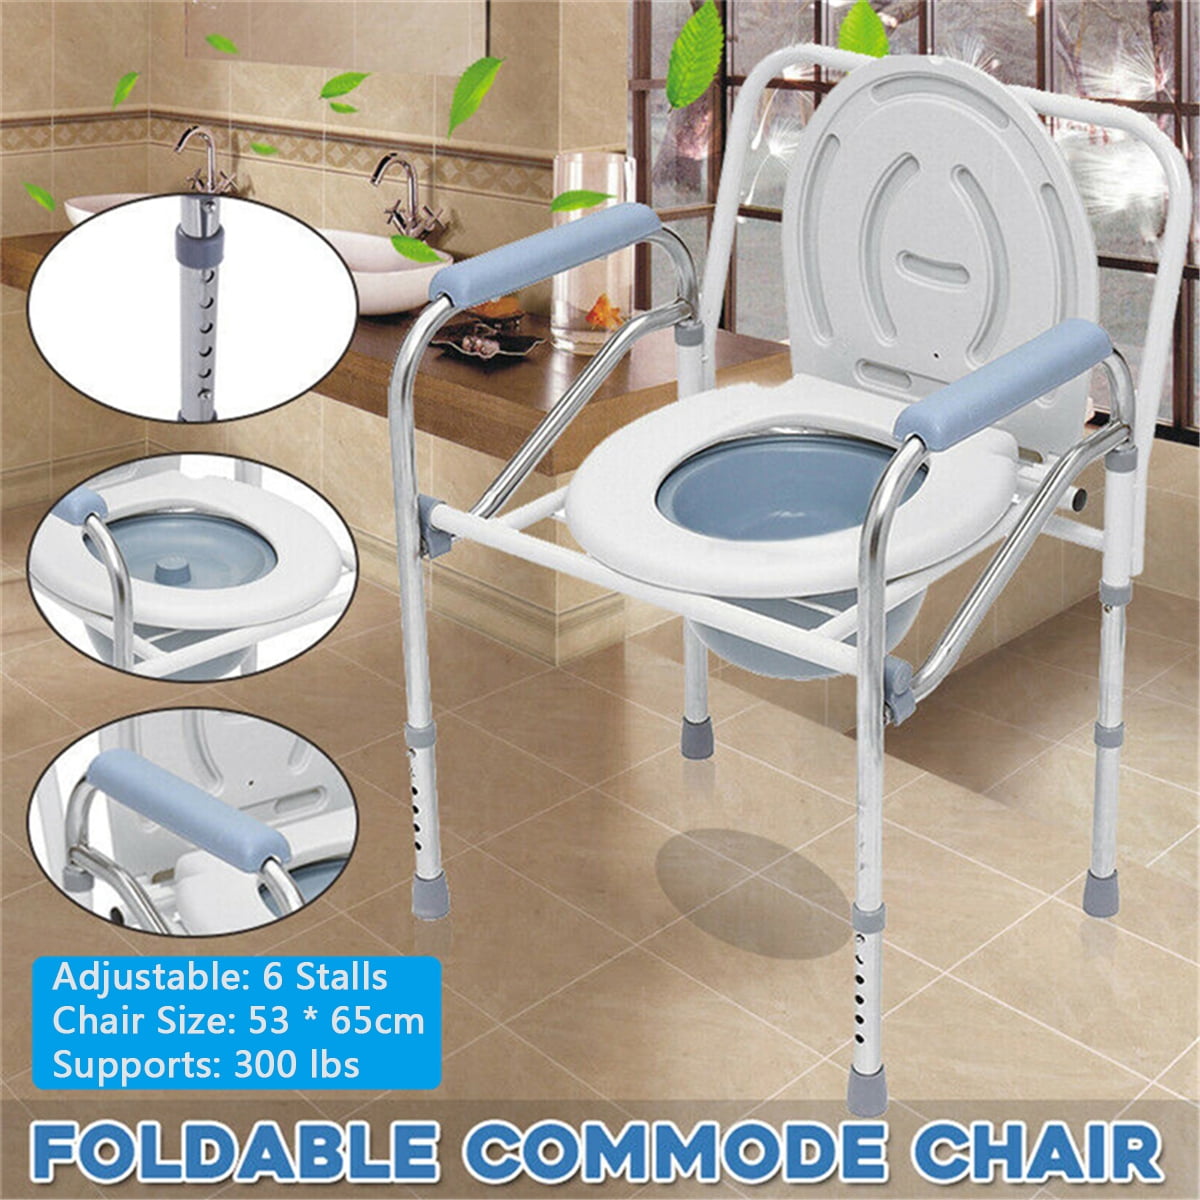 Foldable Commode Chair, lbs Folding Commode, Toilet and Bedside Commode, Comes with Splash Guard/ Bucket/ Lid, White - Walmart.com